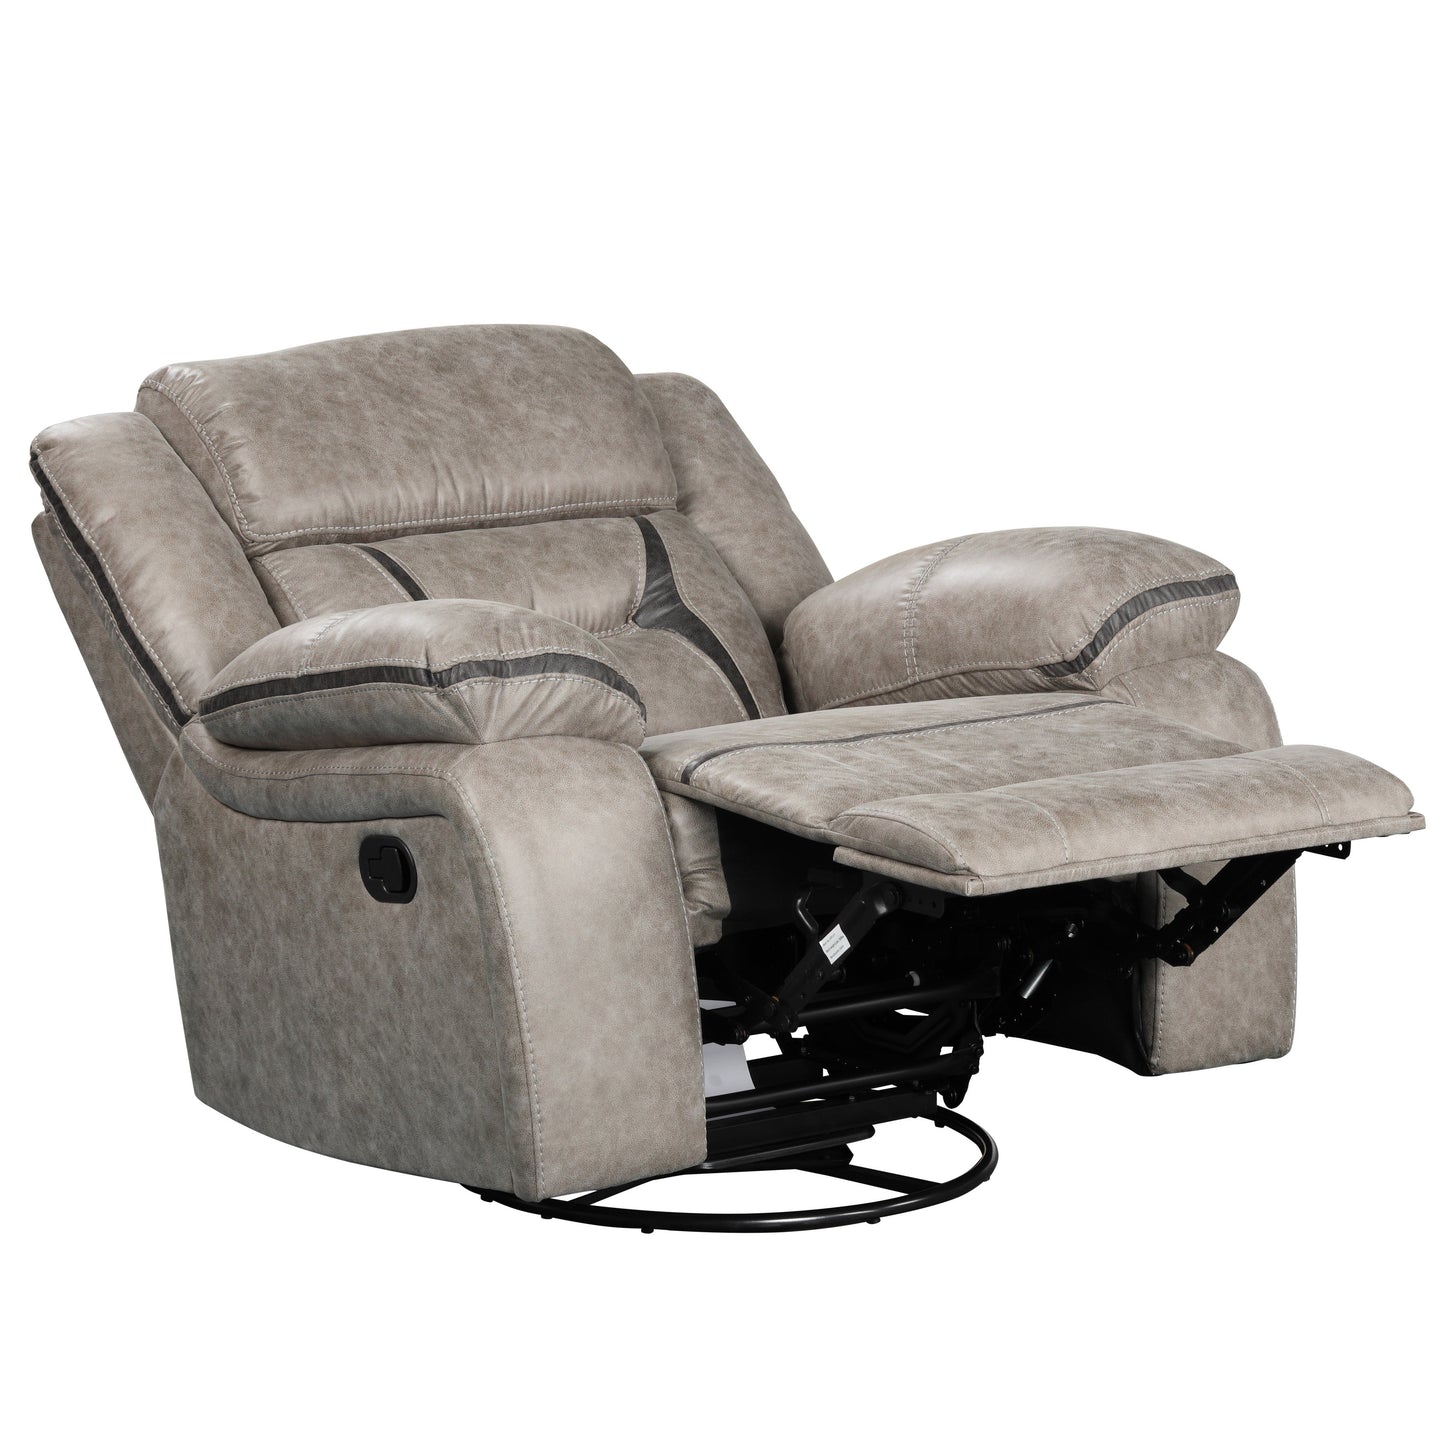 Elkton Manual Motion Reclining Living Room Collection, Taupe